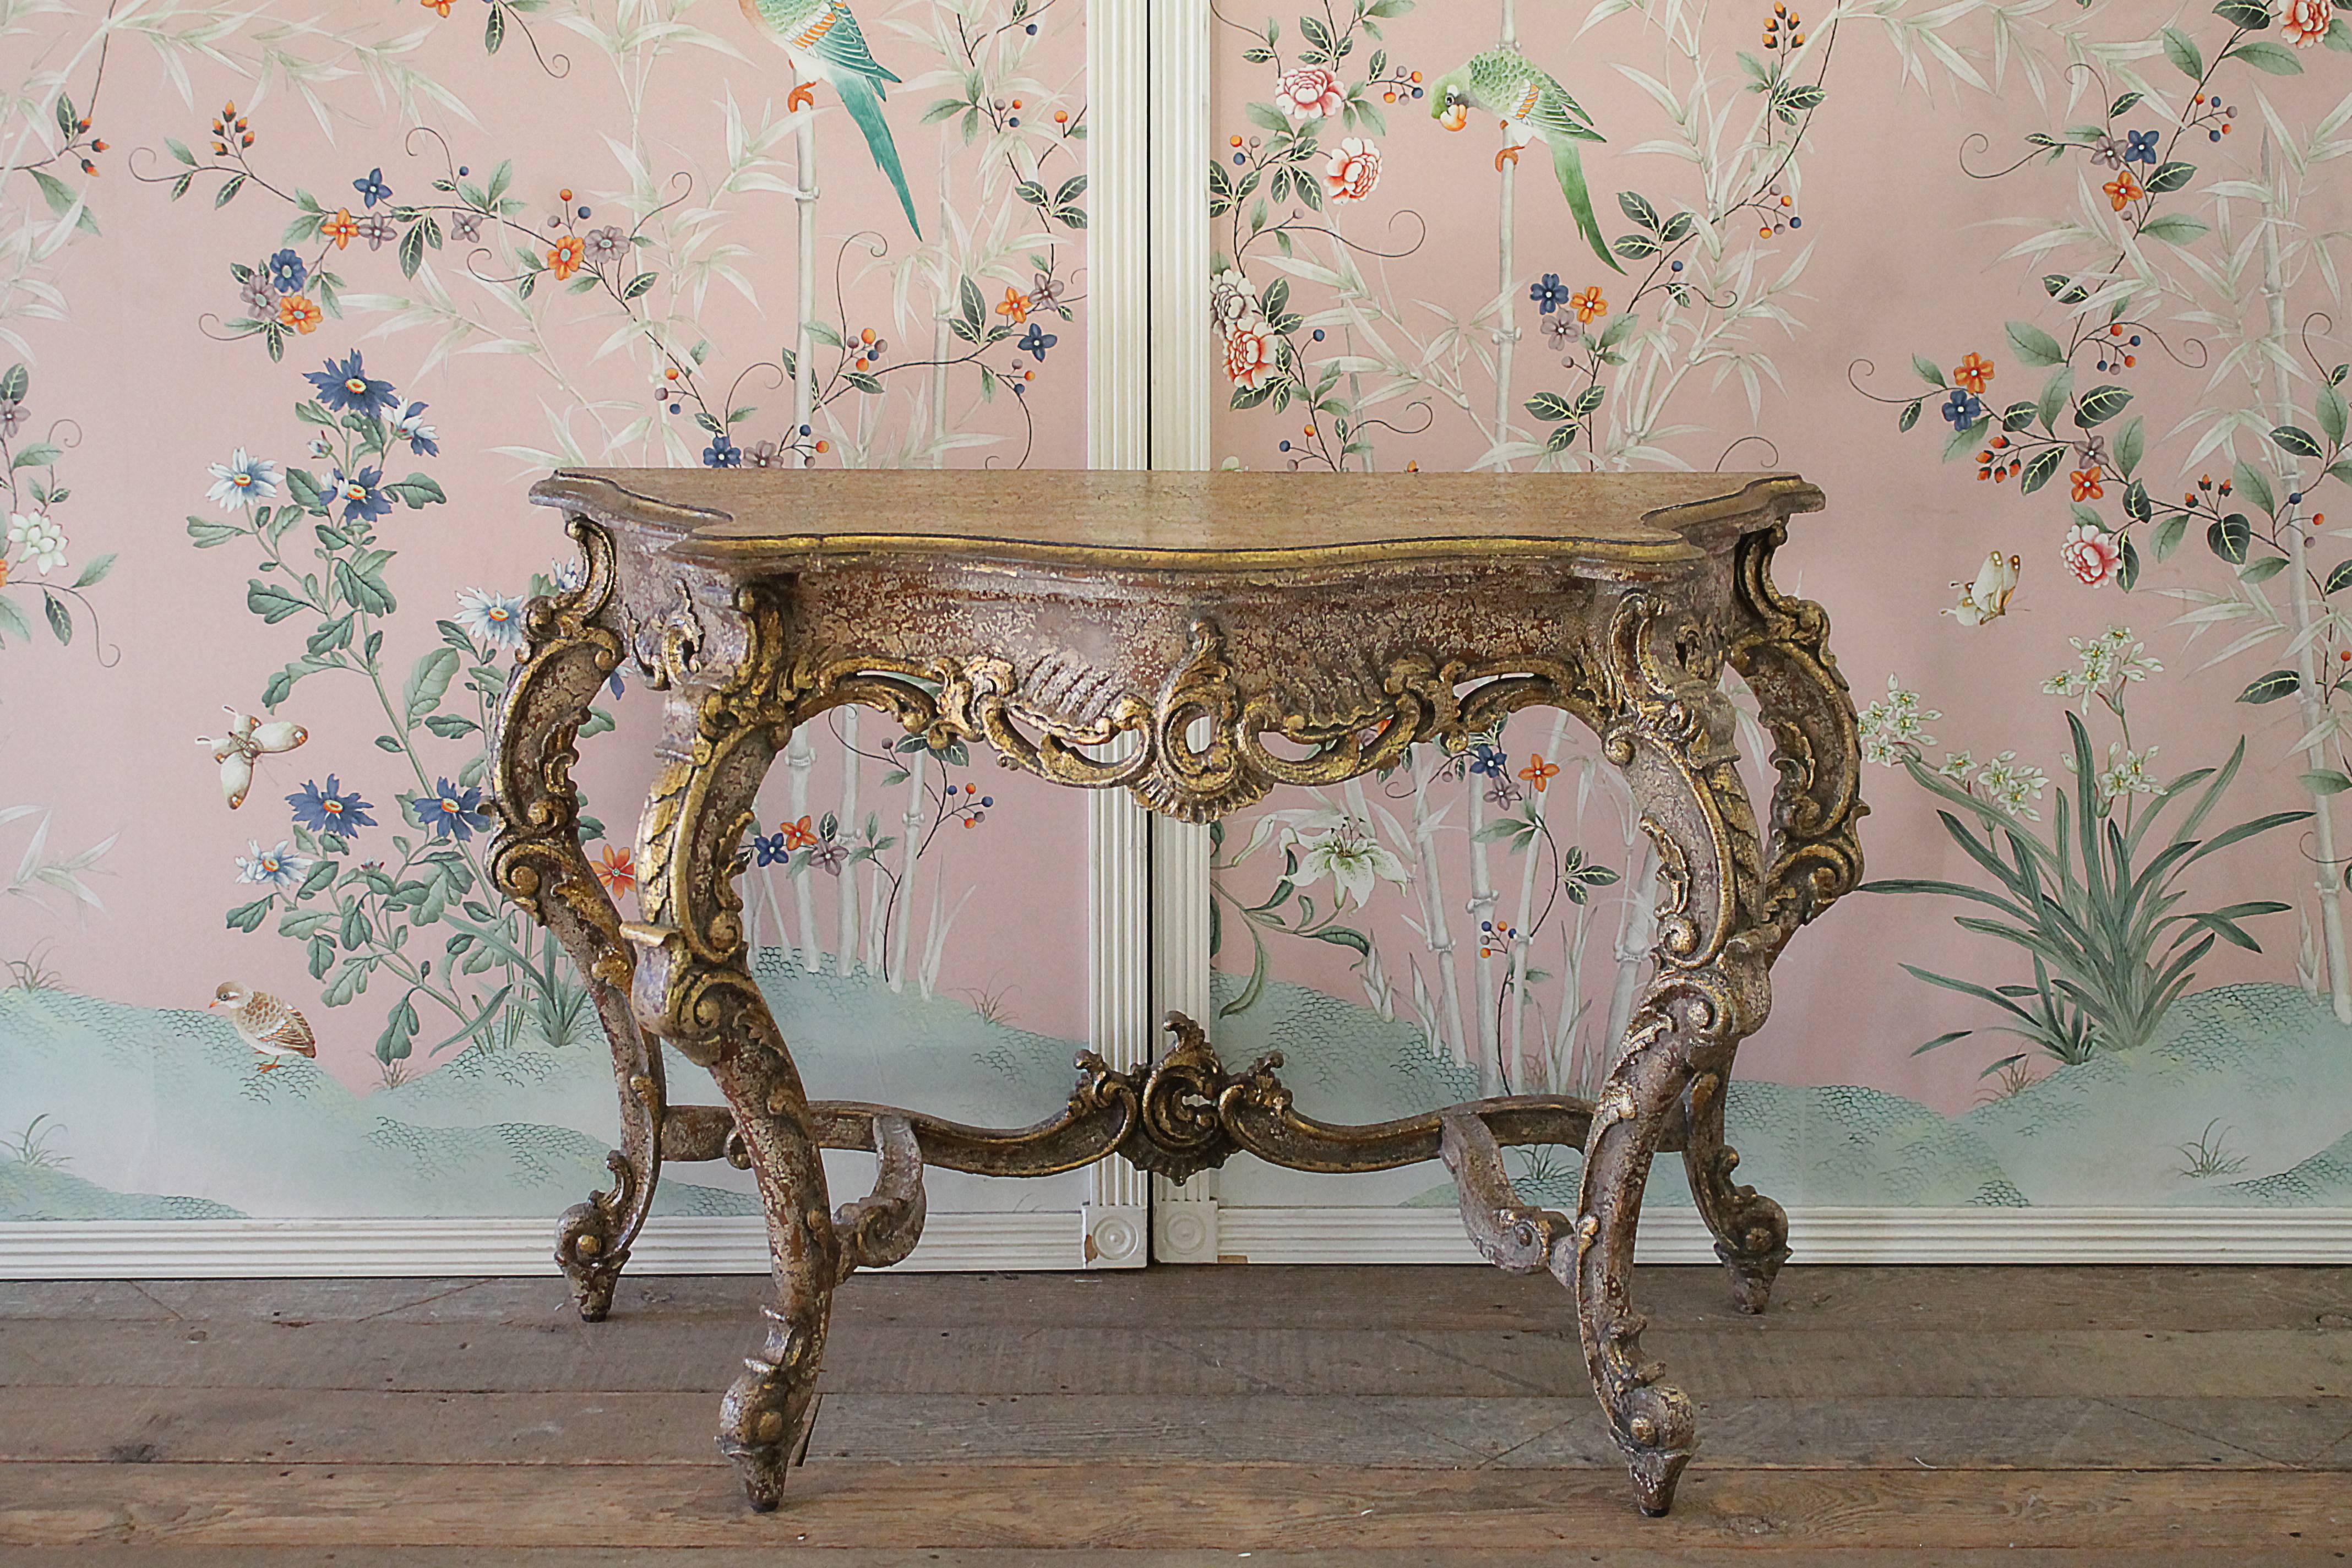 20th Century Gilt Console table with natural painted finish, subtle crackle effect, and gilt accents. Free standing on 4 legs, with large beautiful French Carvings.  Solid and sturdy ready for daily use.  
Measures 46